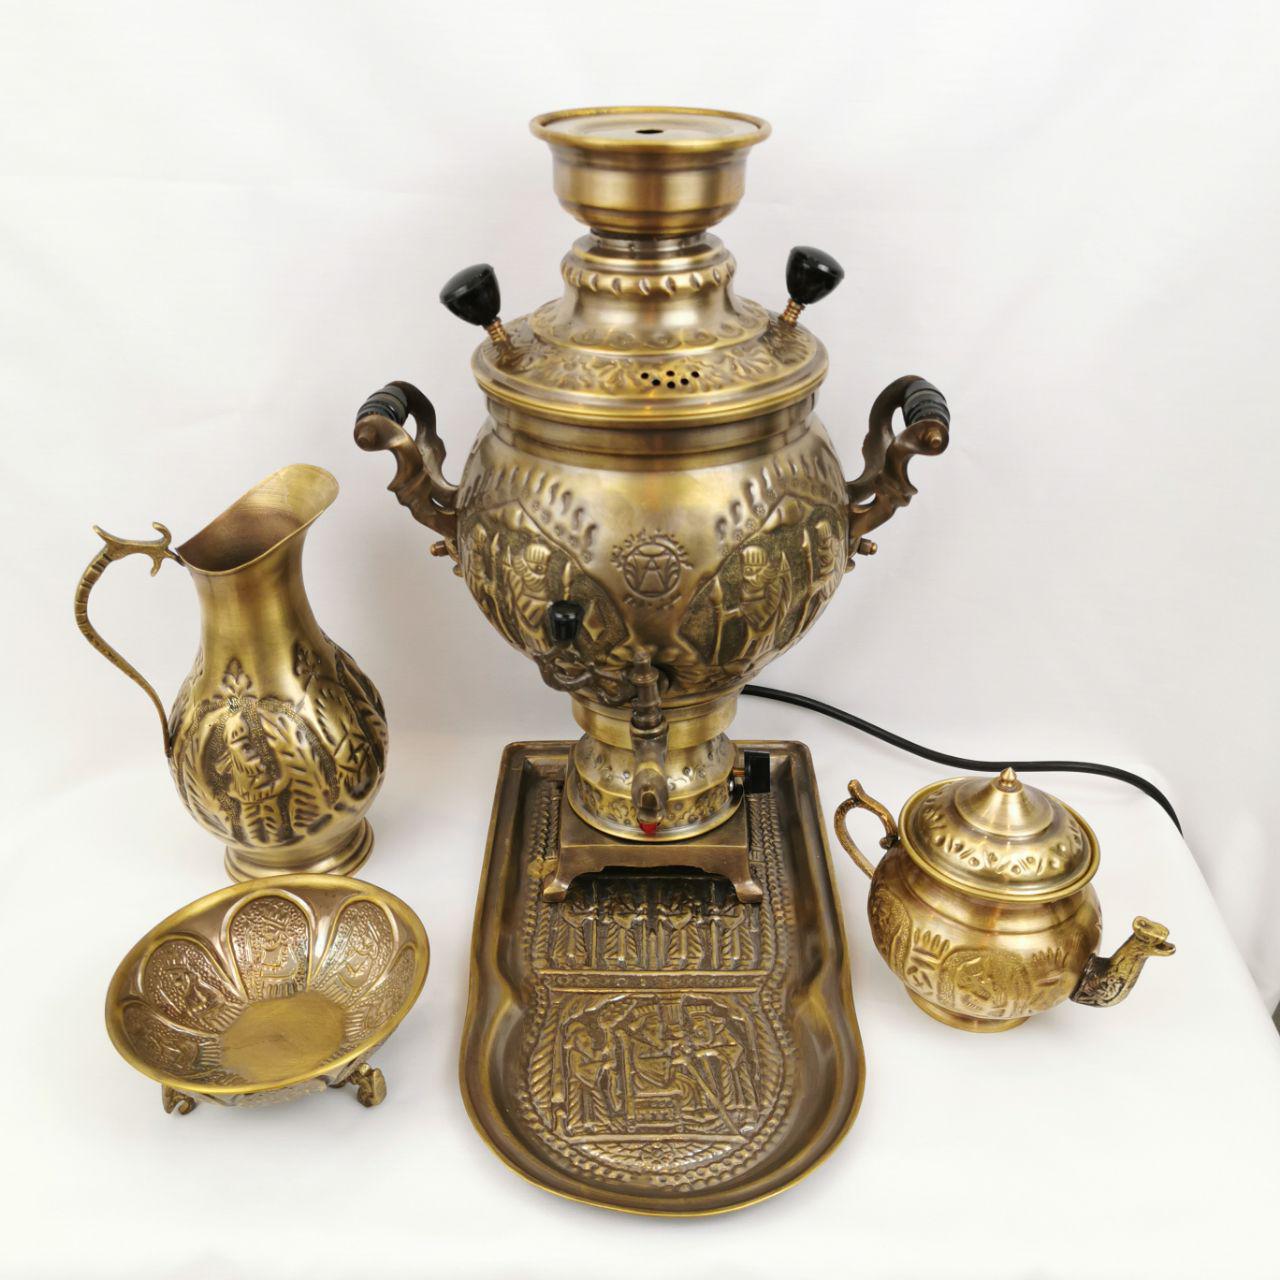 https://www.persiscollection.com/wp-content/uploads/2021/08/PERSEPOLIS-ELECTRIC-SAMOVAR-SET-4-L-persis-collection-3.jpg